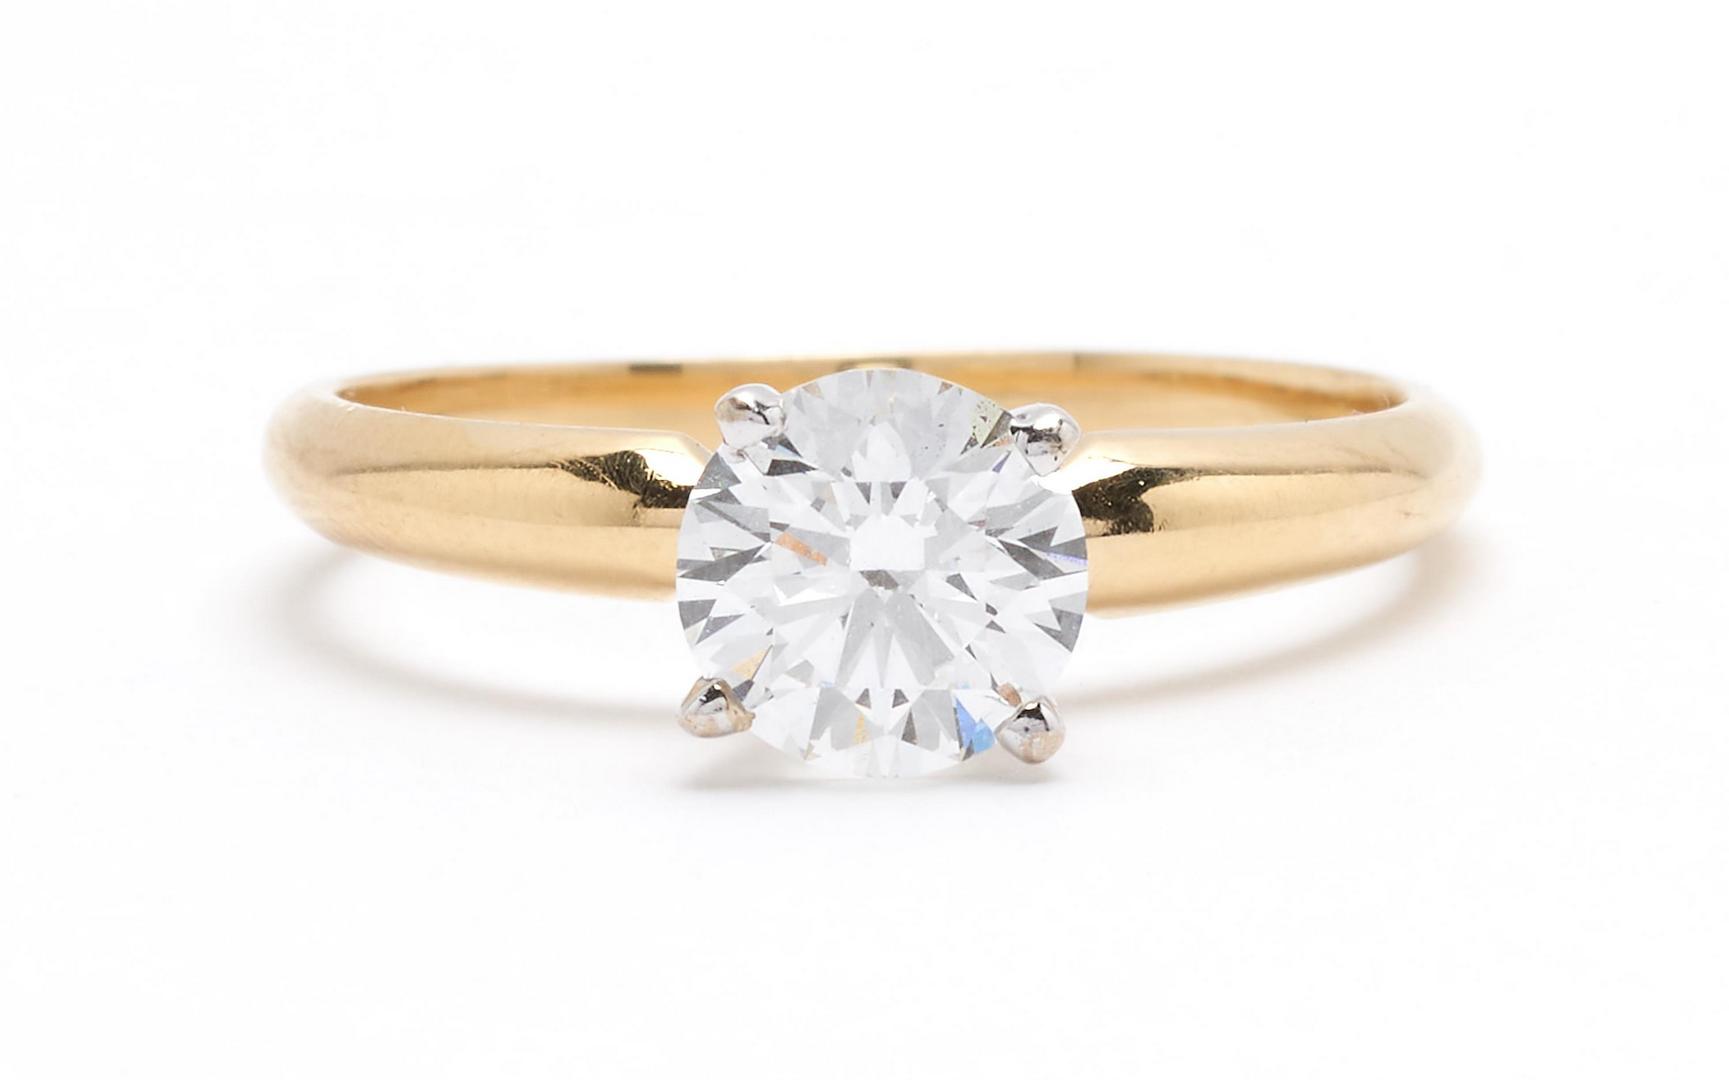 Lot 43: 1.03 Carat GIA Diamond Ring, F Color and 18K Dia. Band